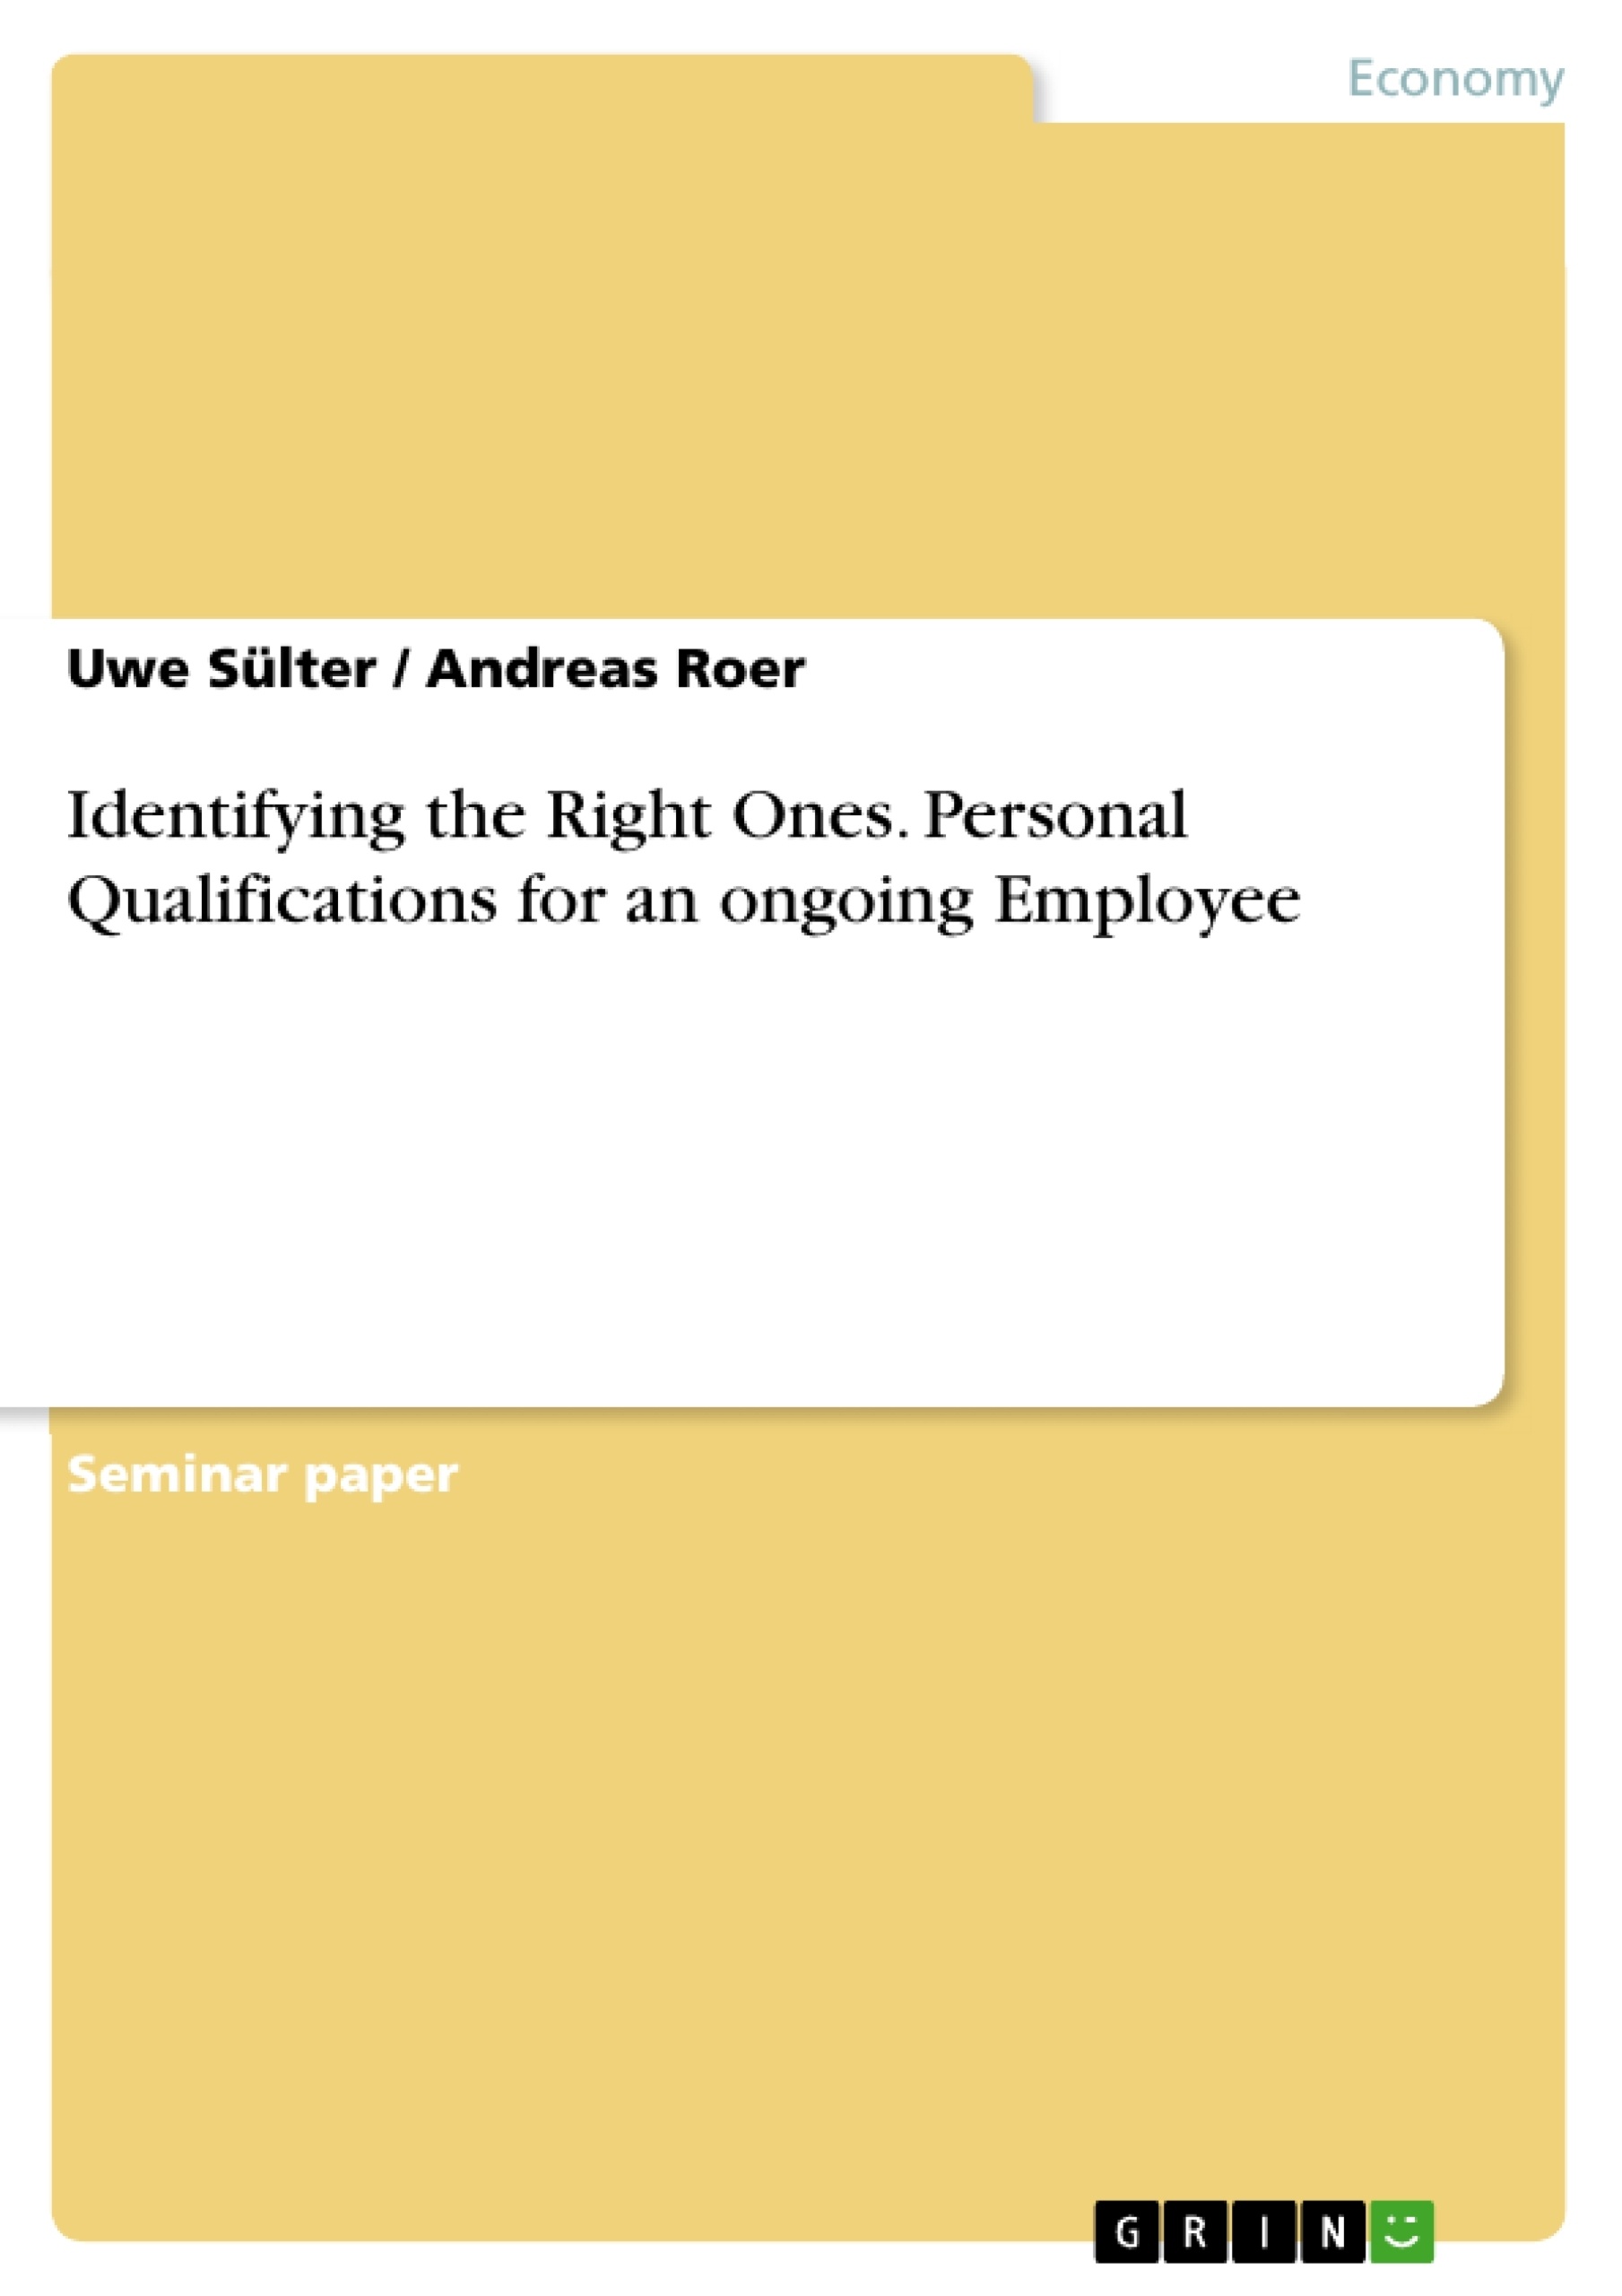 Title: Identifying the Right Ones. Personal Qualifications for an ongoing Employee